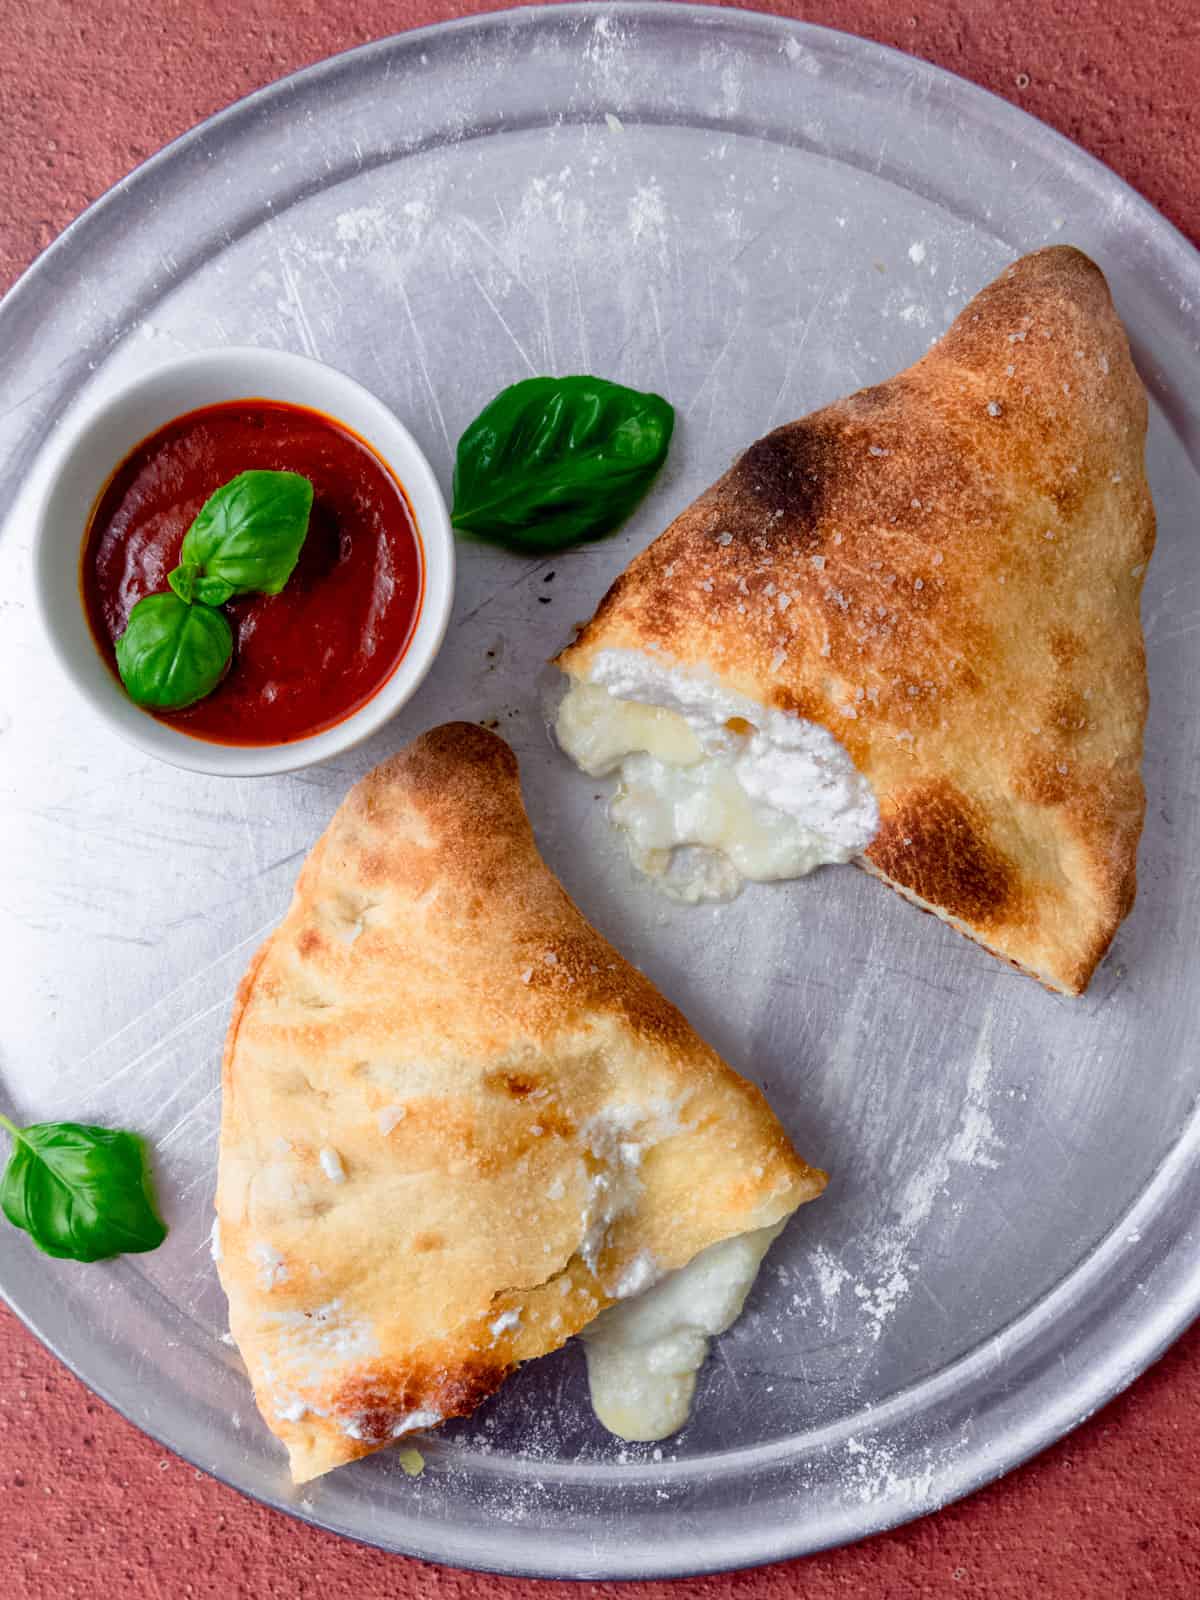 Baked cheese calzone tat is cut in half and served with a bowl of marinara sauce for dipping.